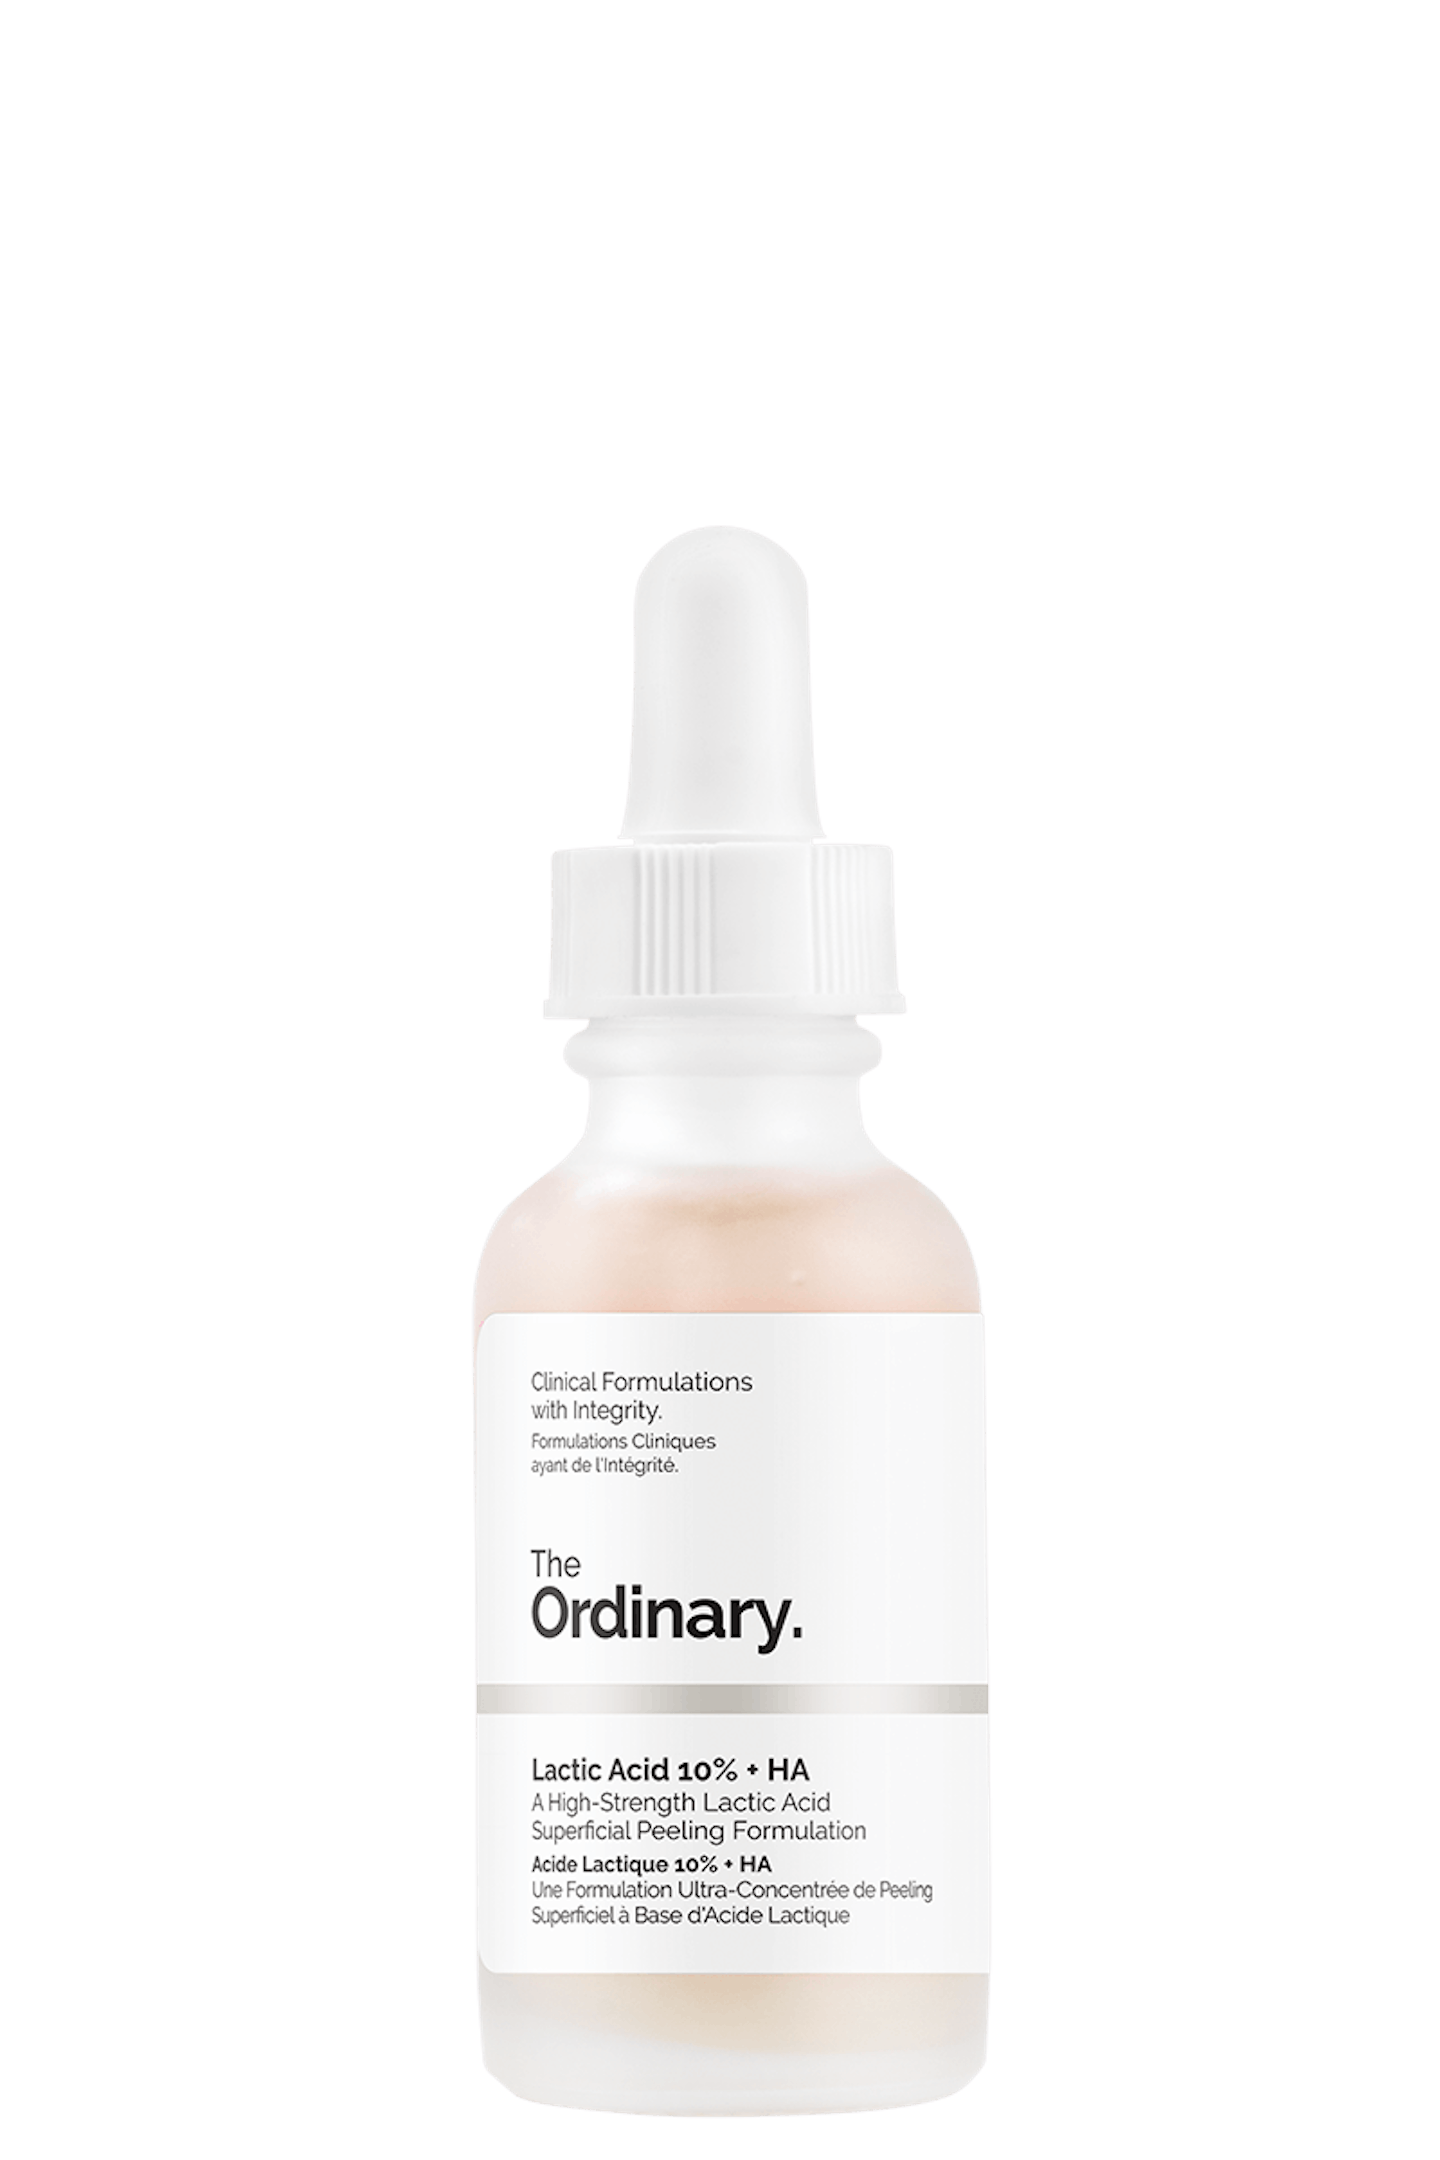 The Ordinary Best Buys